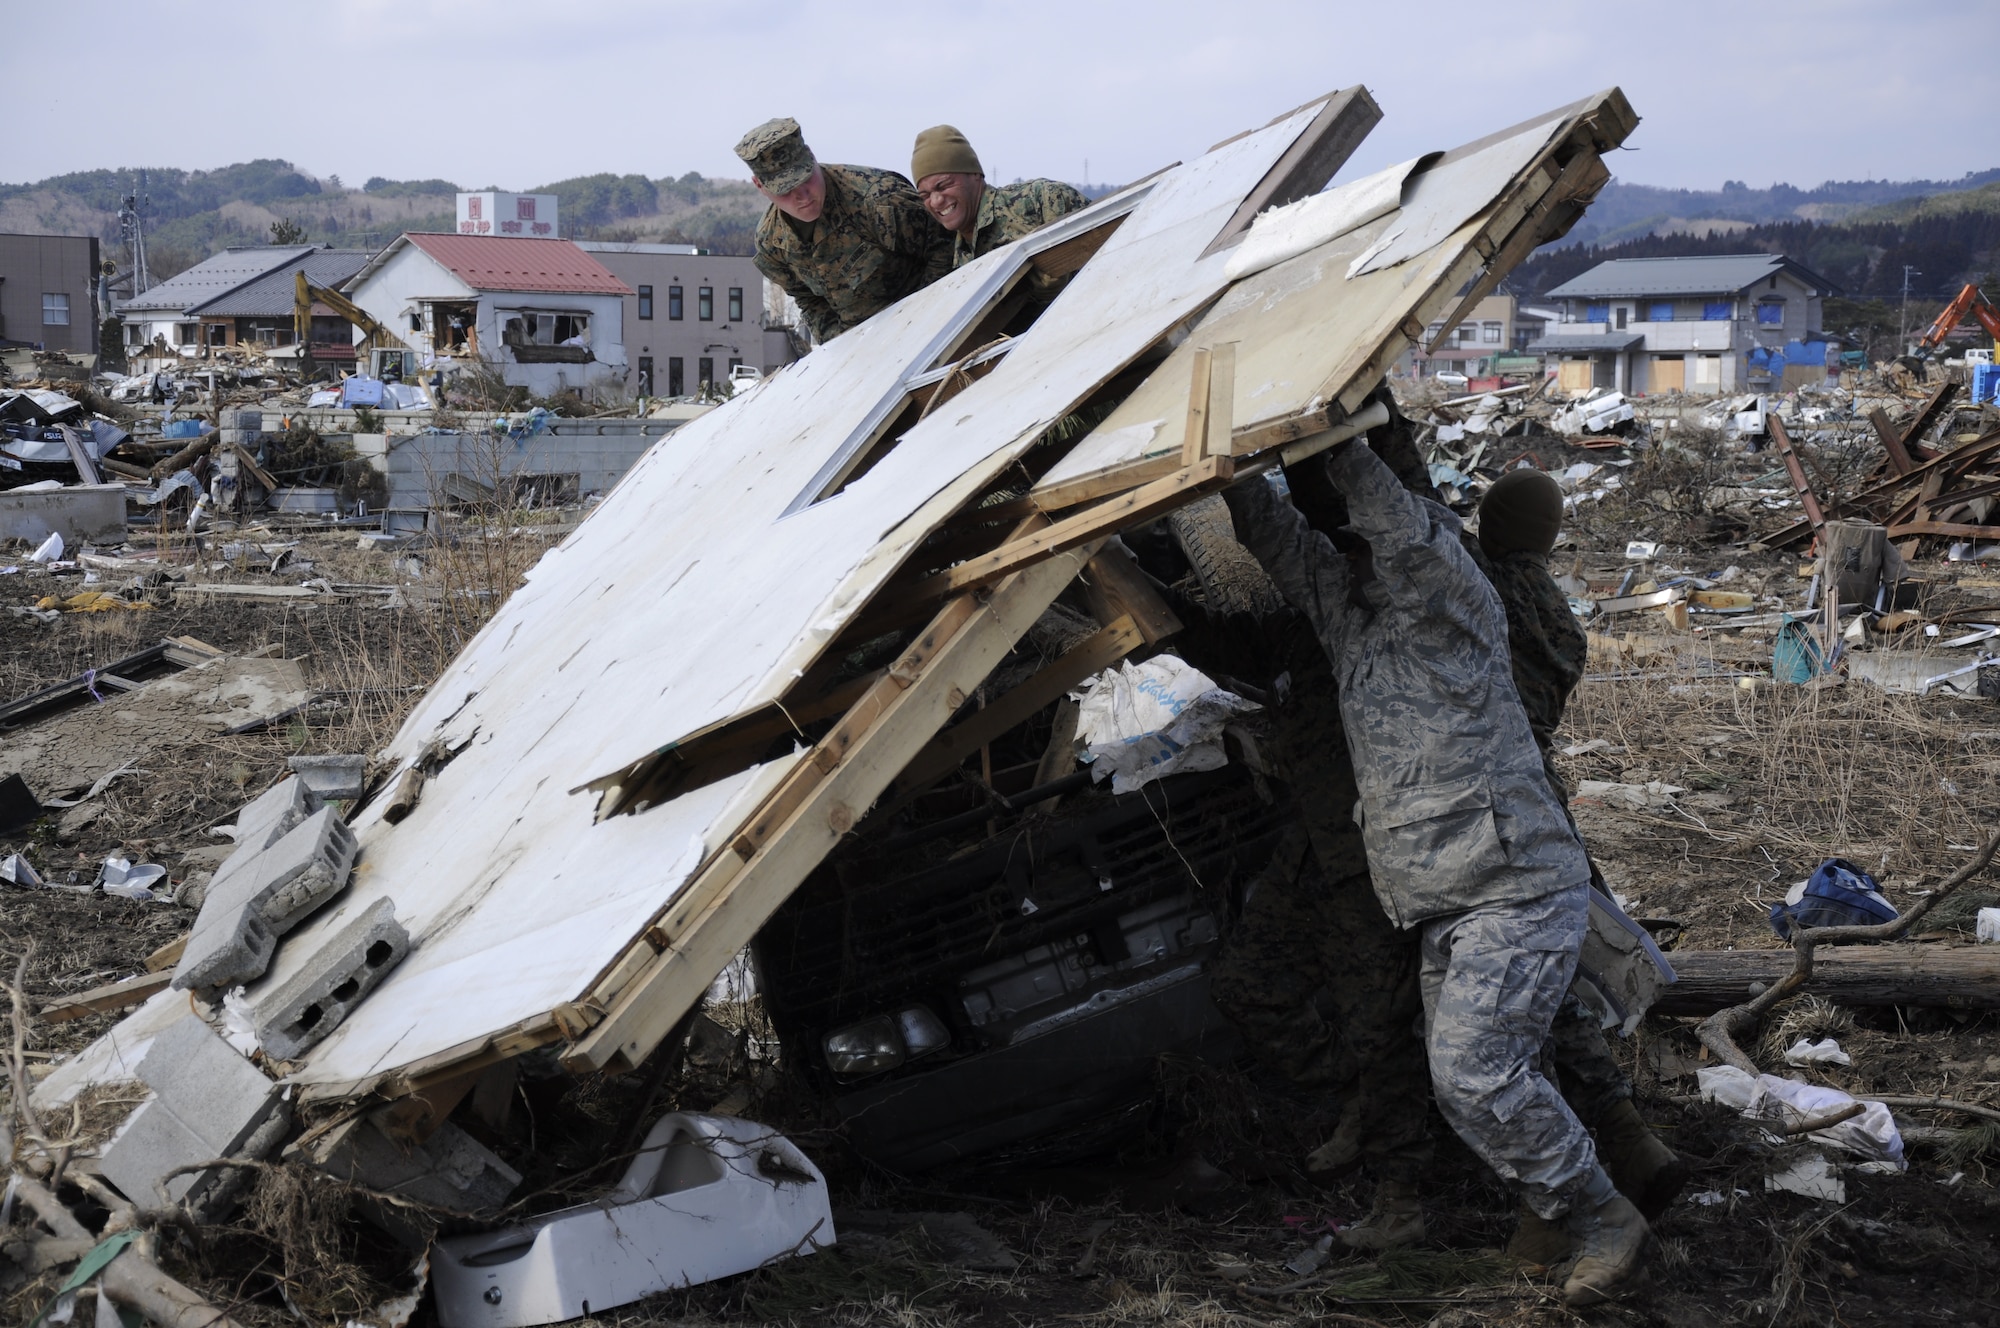 NODA MURA, Iwate, Japan – U.S. service members lift a knocked-down wall off a damaged car in a tsunami-struck area here March 29. Nearly 40 U.S. service members and civilians left Misawa Air Base, Japan, to assist in tsunami cleanup and relief efforts in the village as part of Operation Tomodachi. (U.S. Air Force photo by Senior Airman Joe McFadden/Released)